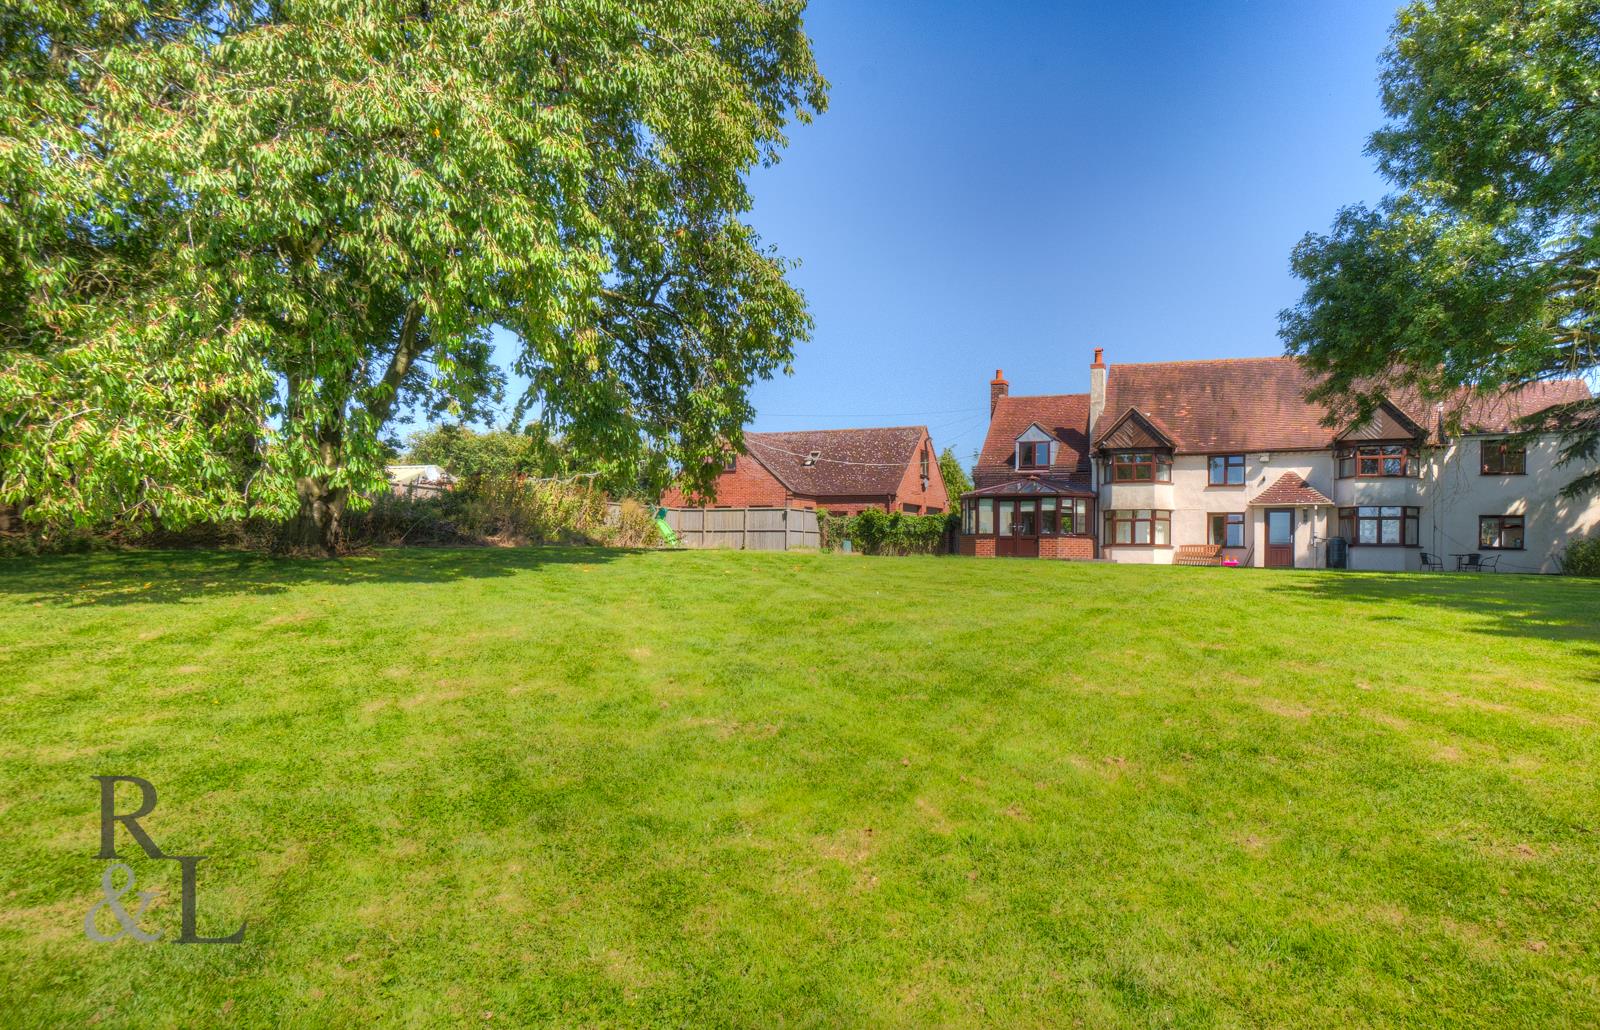 Property image for Appleby Hill, Austrey, Atherstone